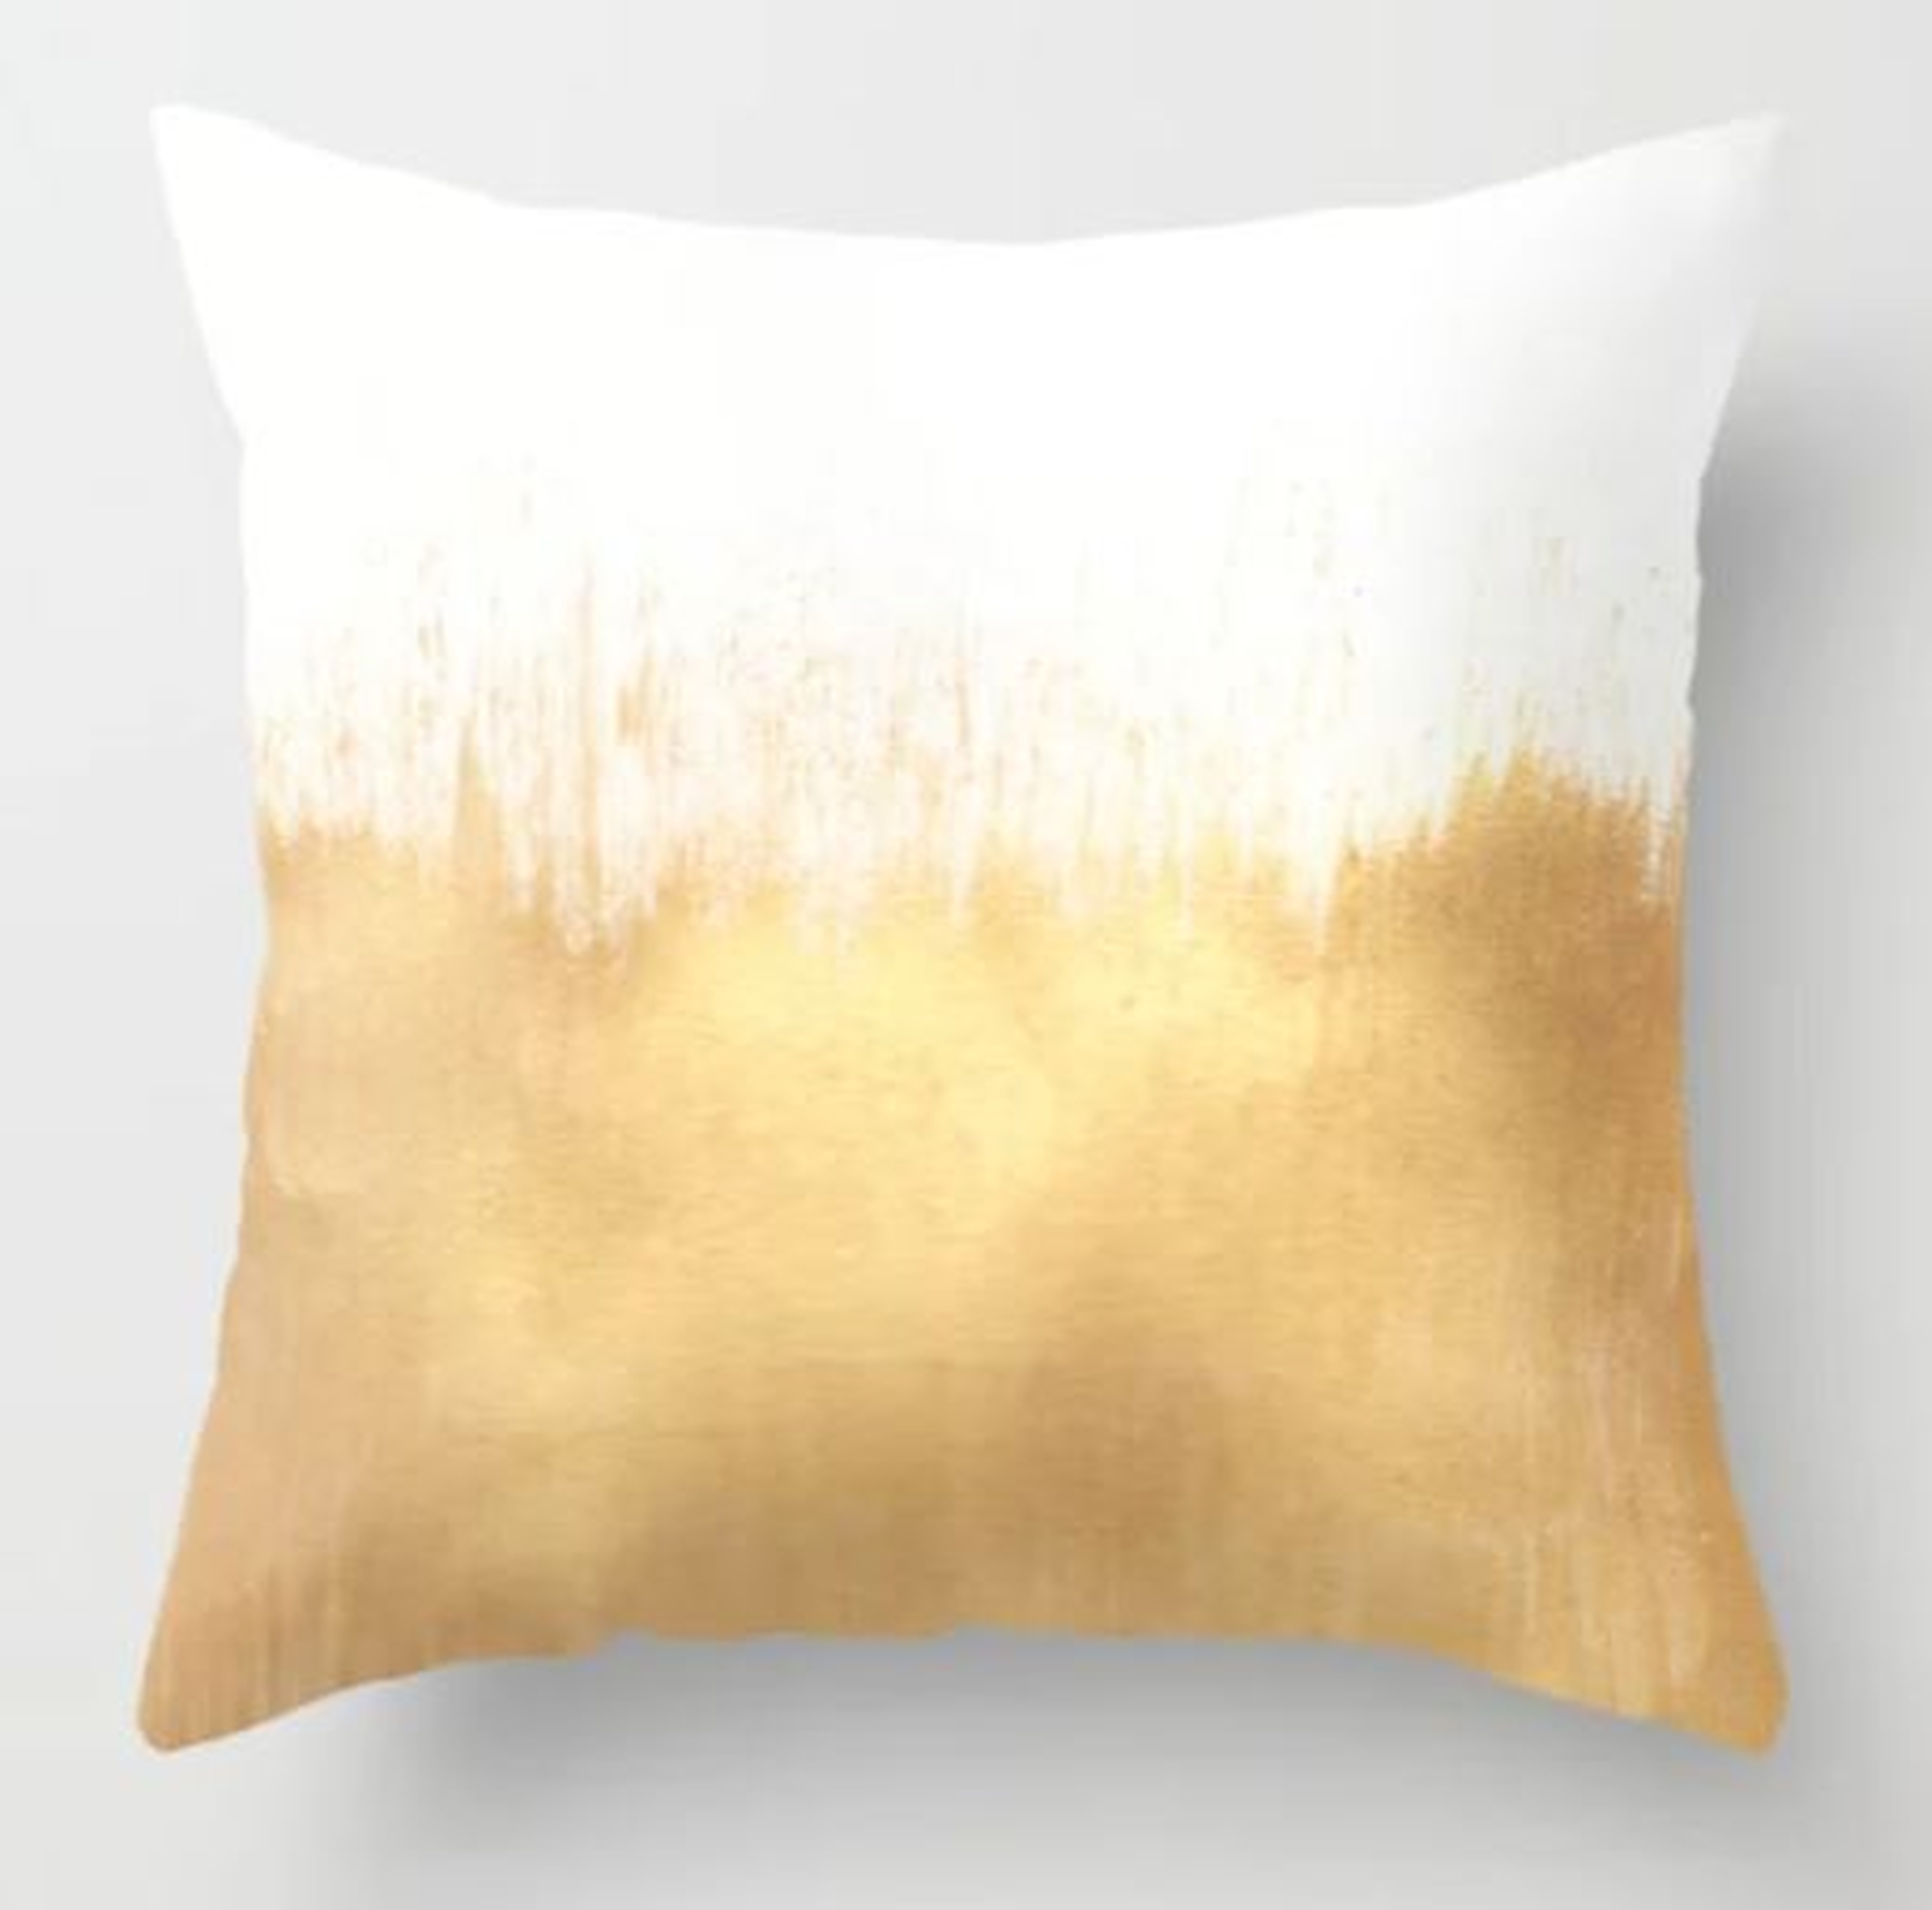 Brushed Gold Throw Pillow - 18x18 with insert - Society6